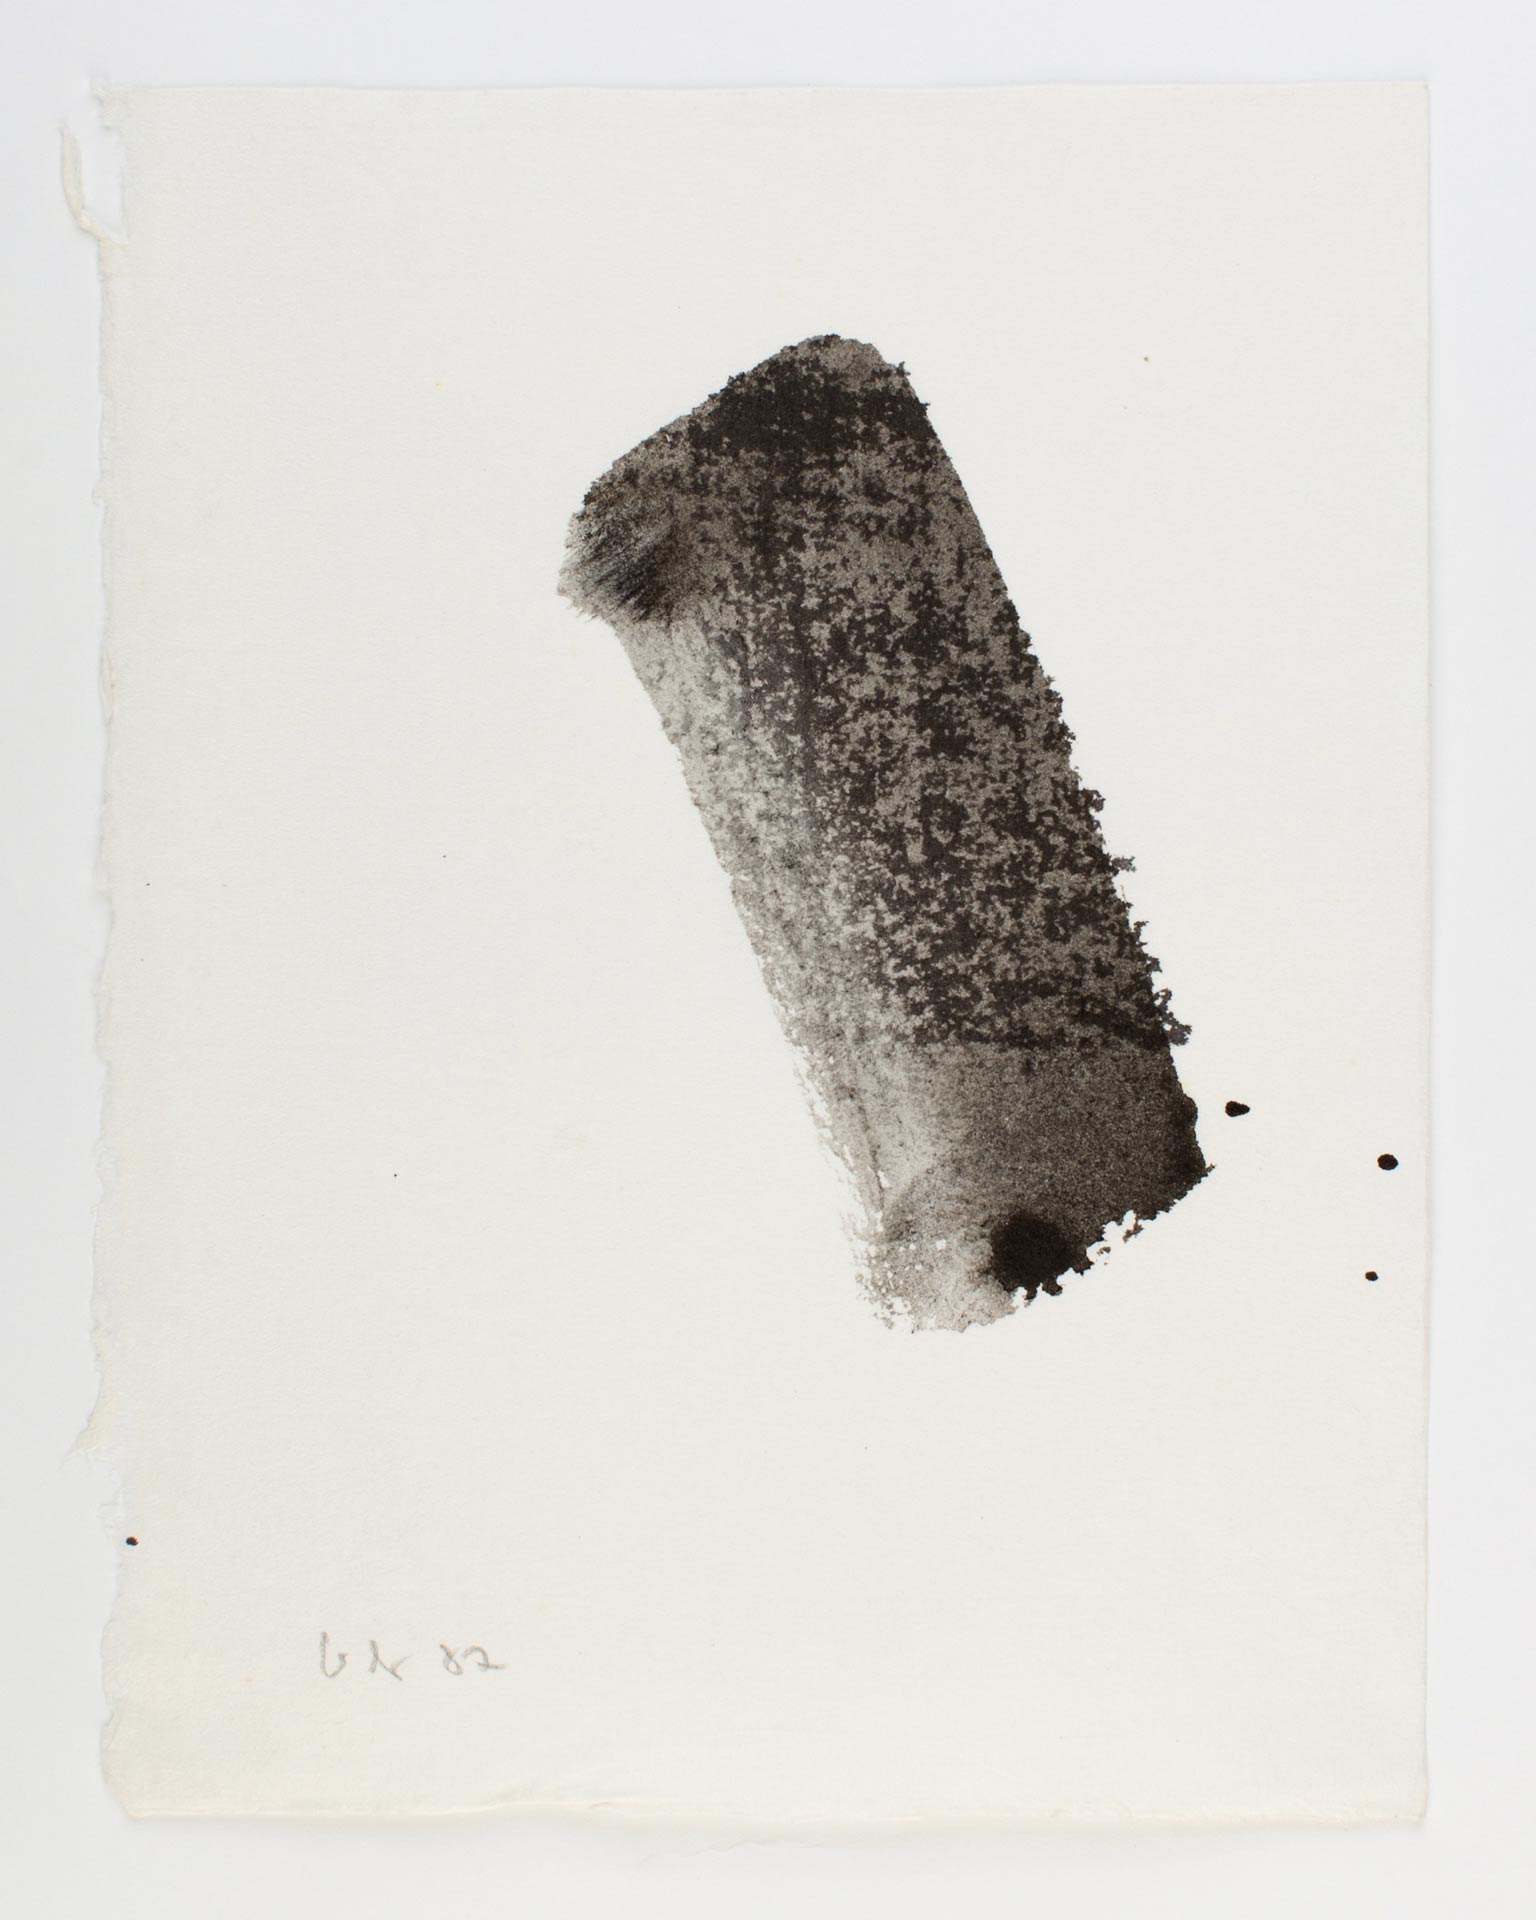 Untitled | 1987 | 28x21 cm ink on paper